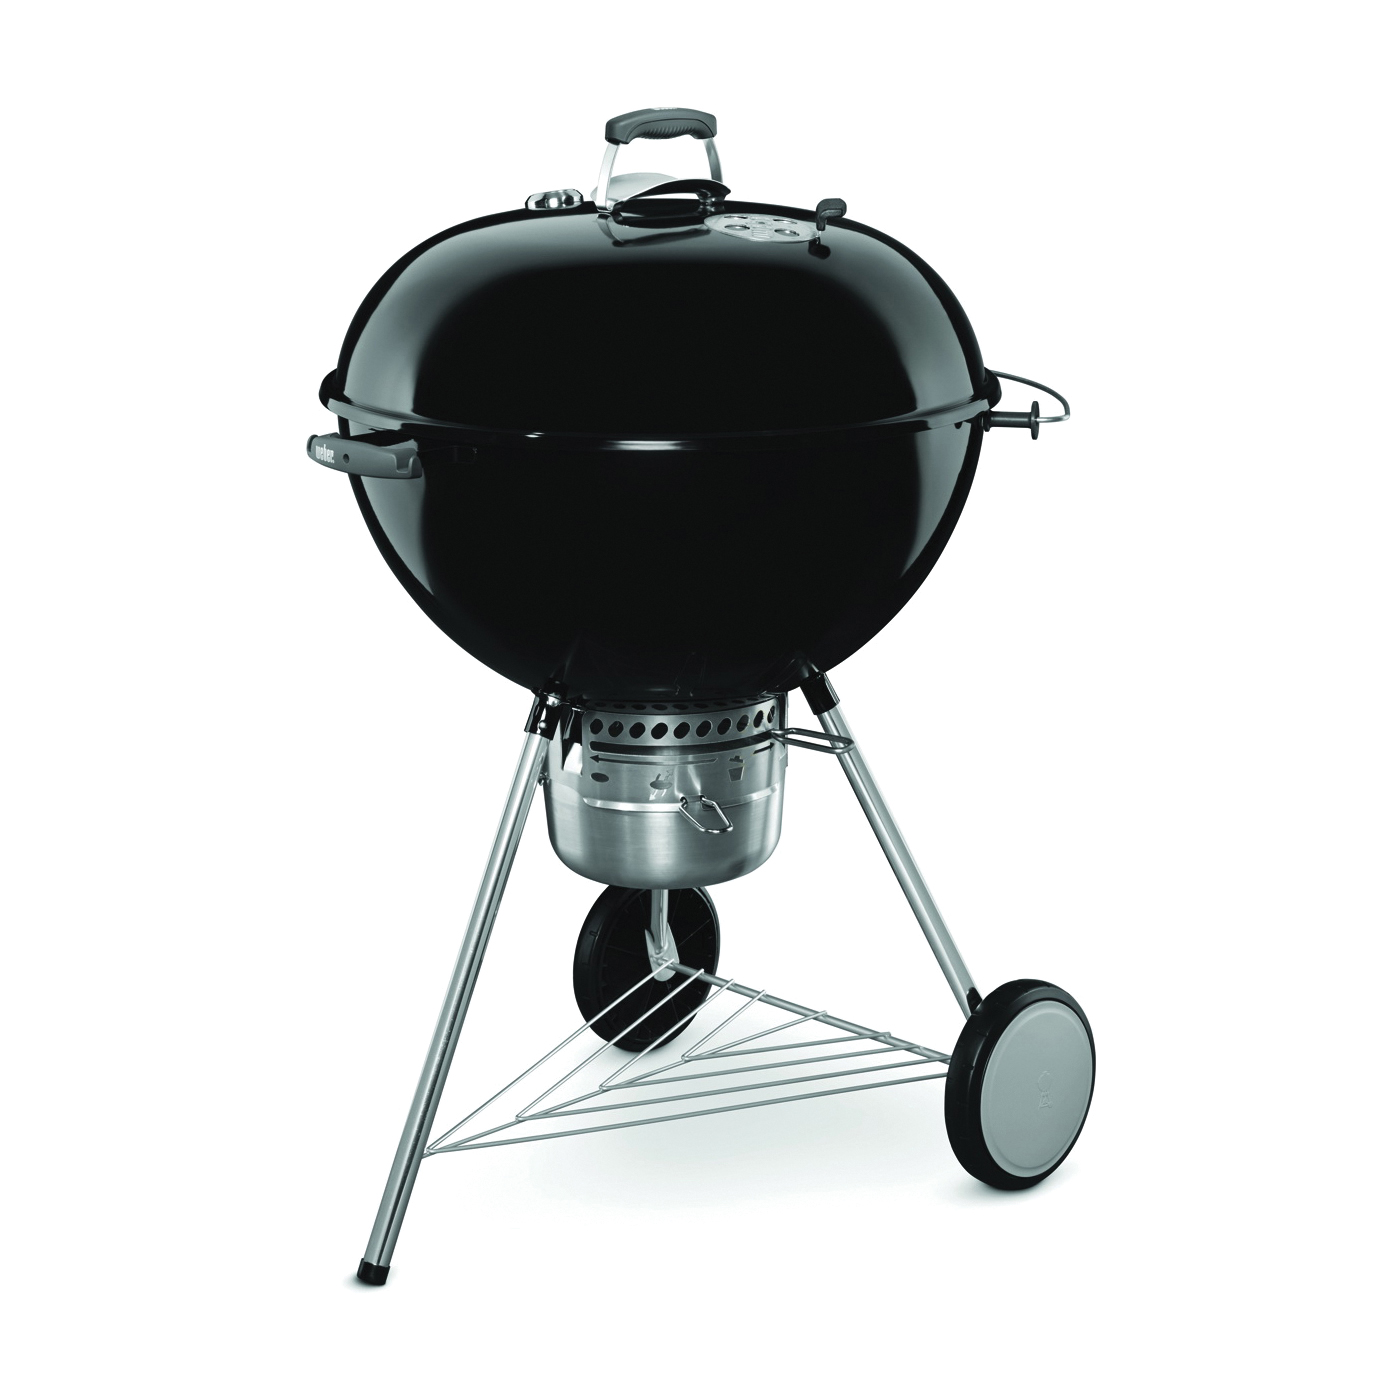 Original Kettle 16401001 Premium Charcoal Grill, 508 sq-in Primary Cooking Surface, Black